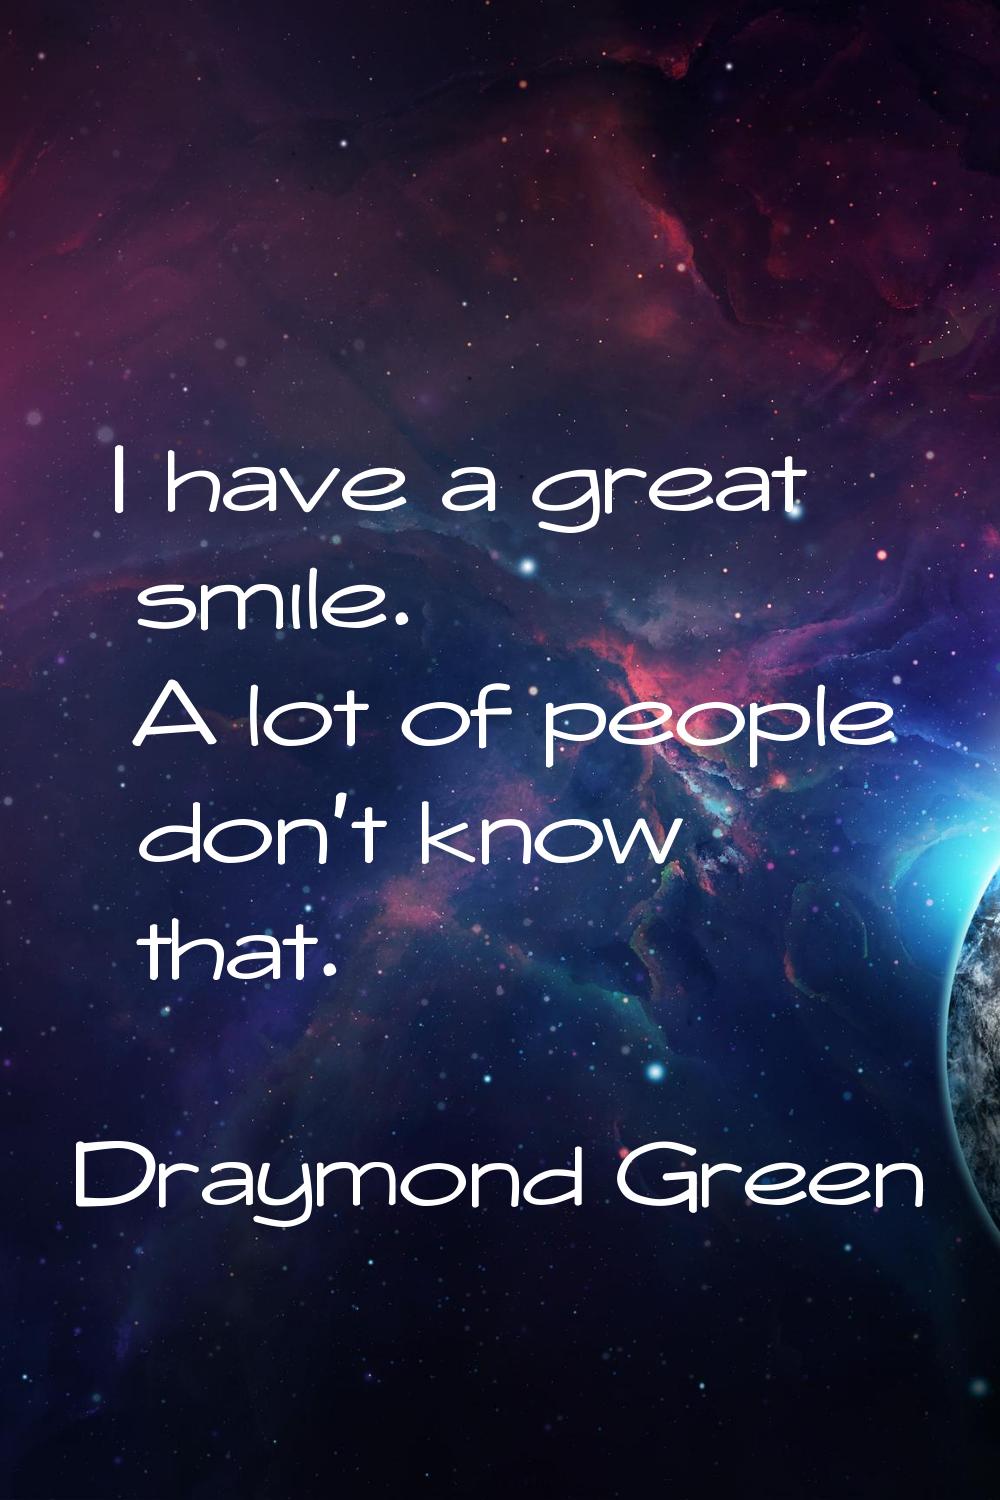 I have a great smile. A lot of people don't know that.